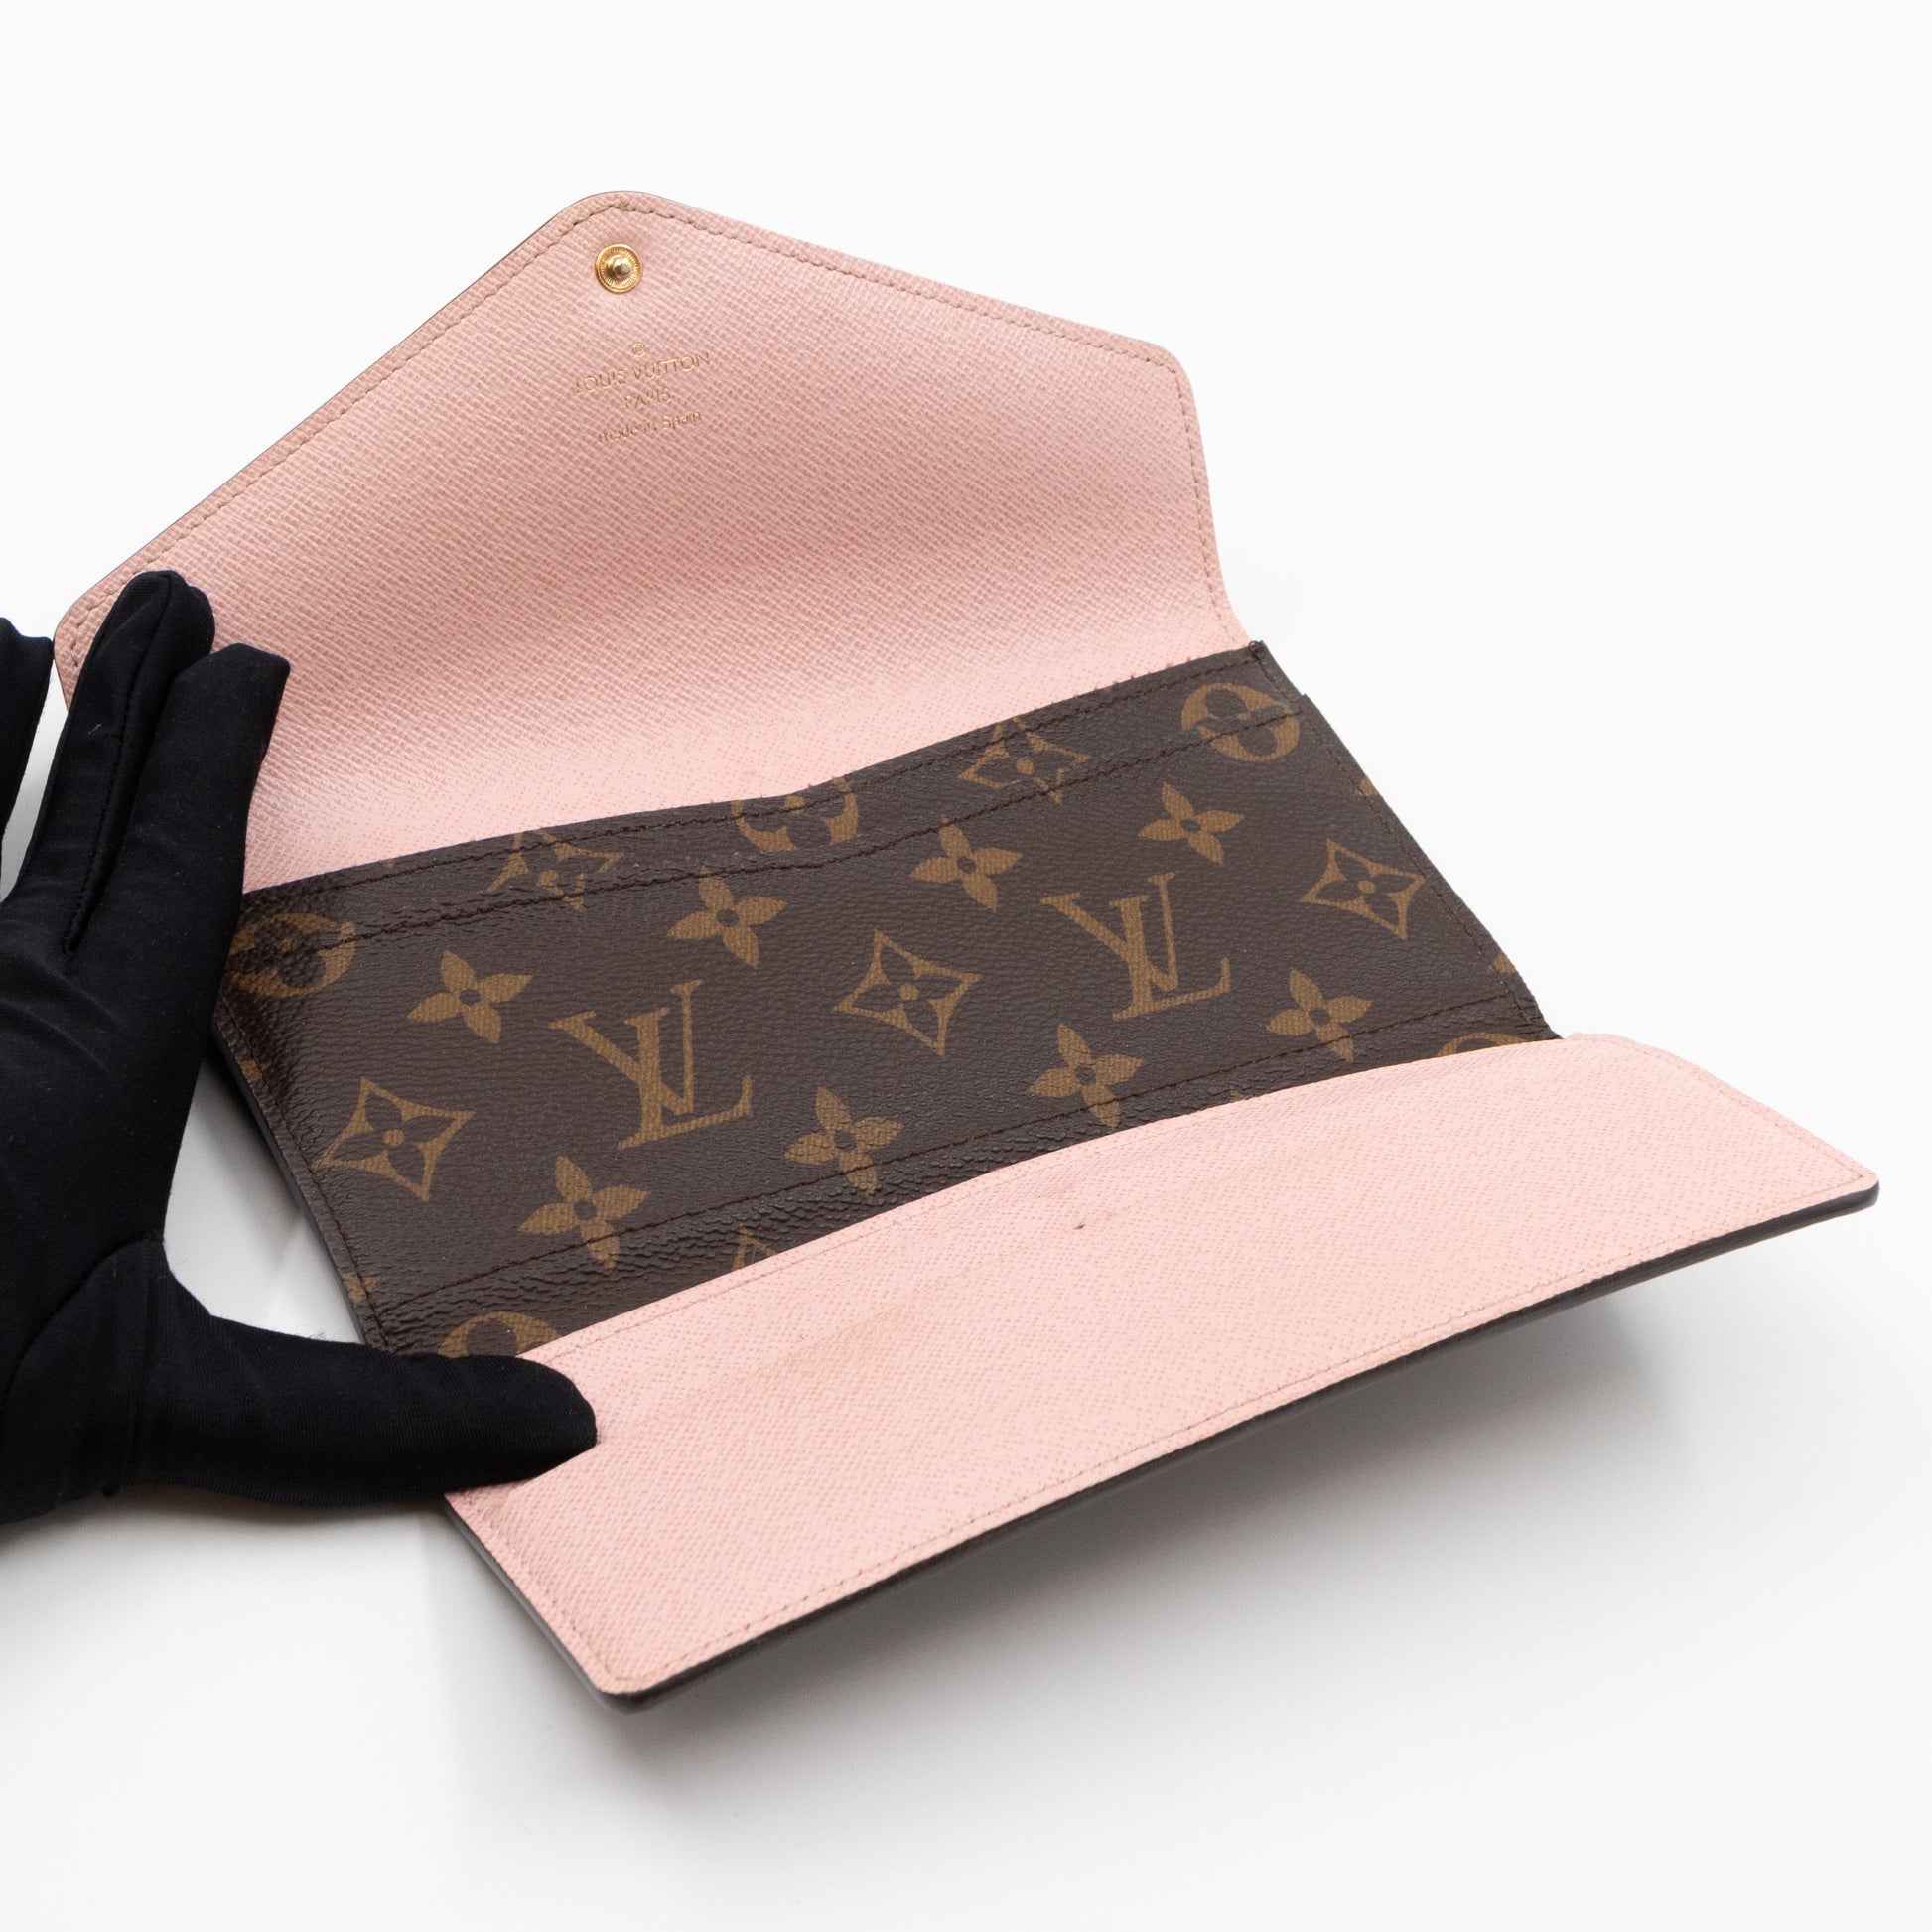 I bought the Joséphine wallet in rose ballerine yesterday (1st LV